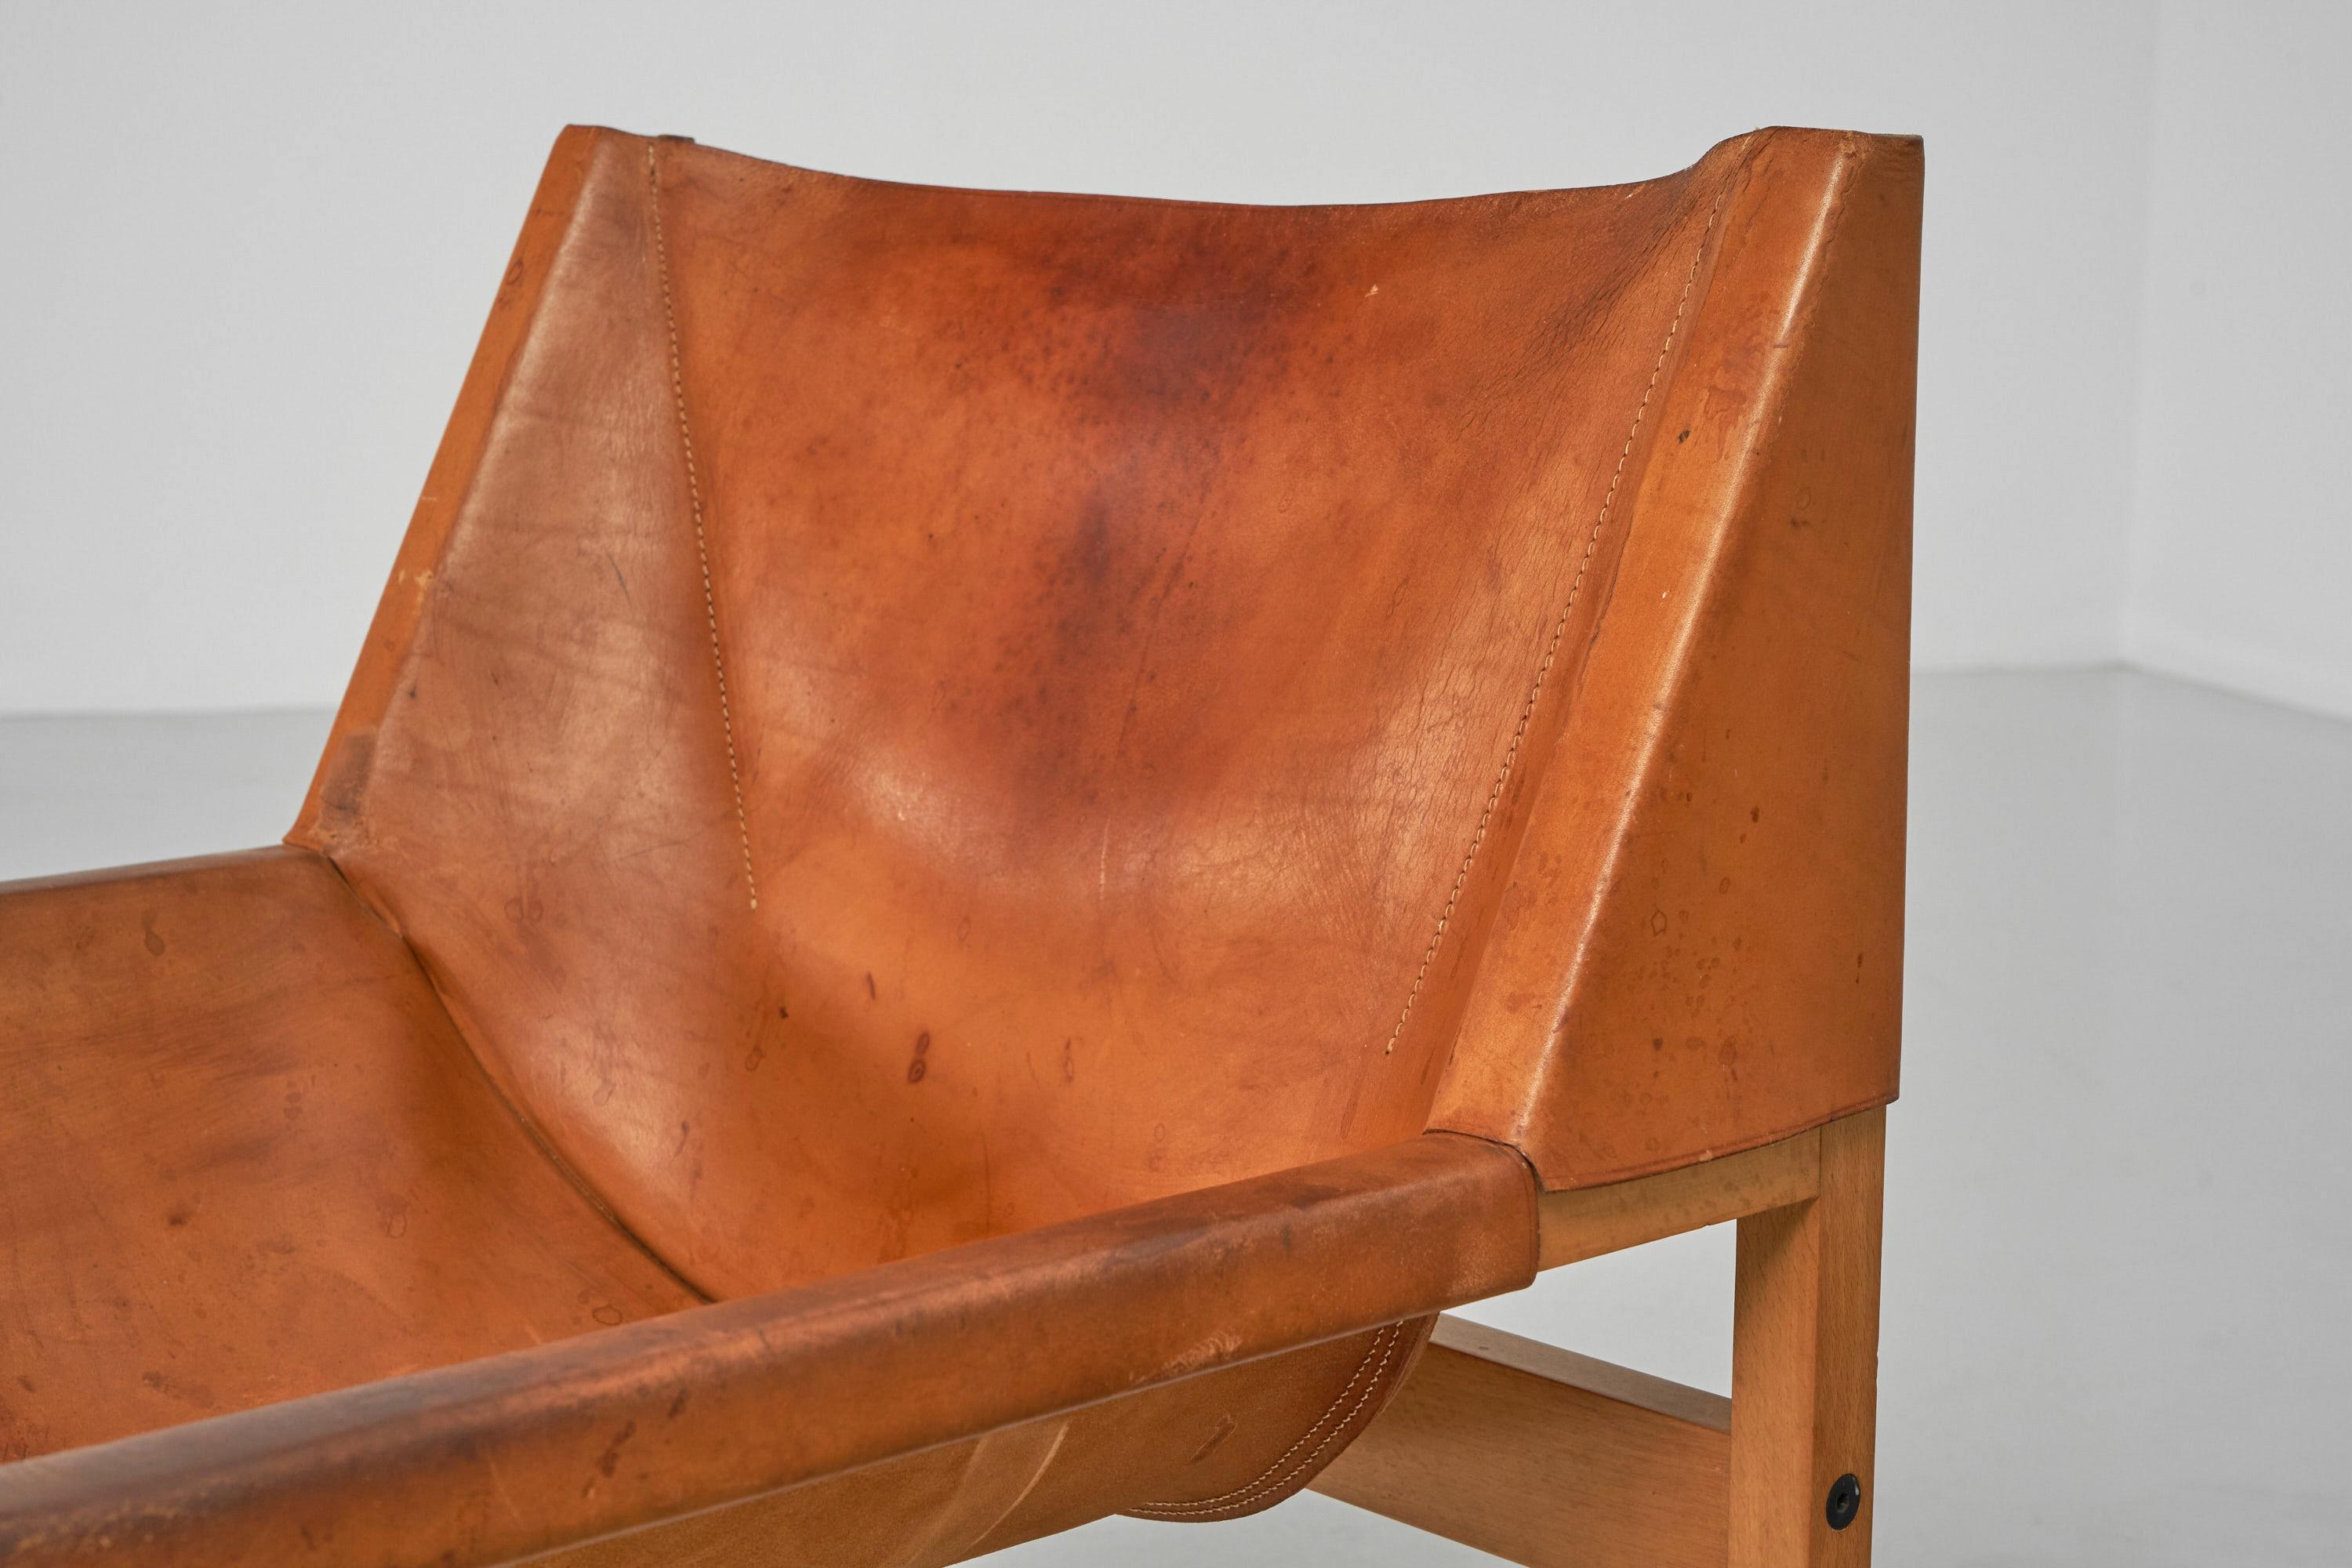 Rainer Schell Canto chair for Franz Schlapp, Germany, 1964 For Sale 1